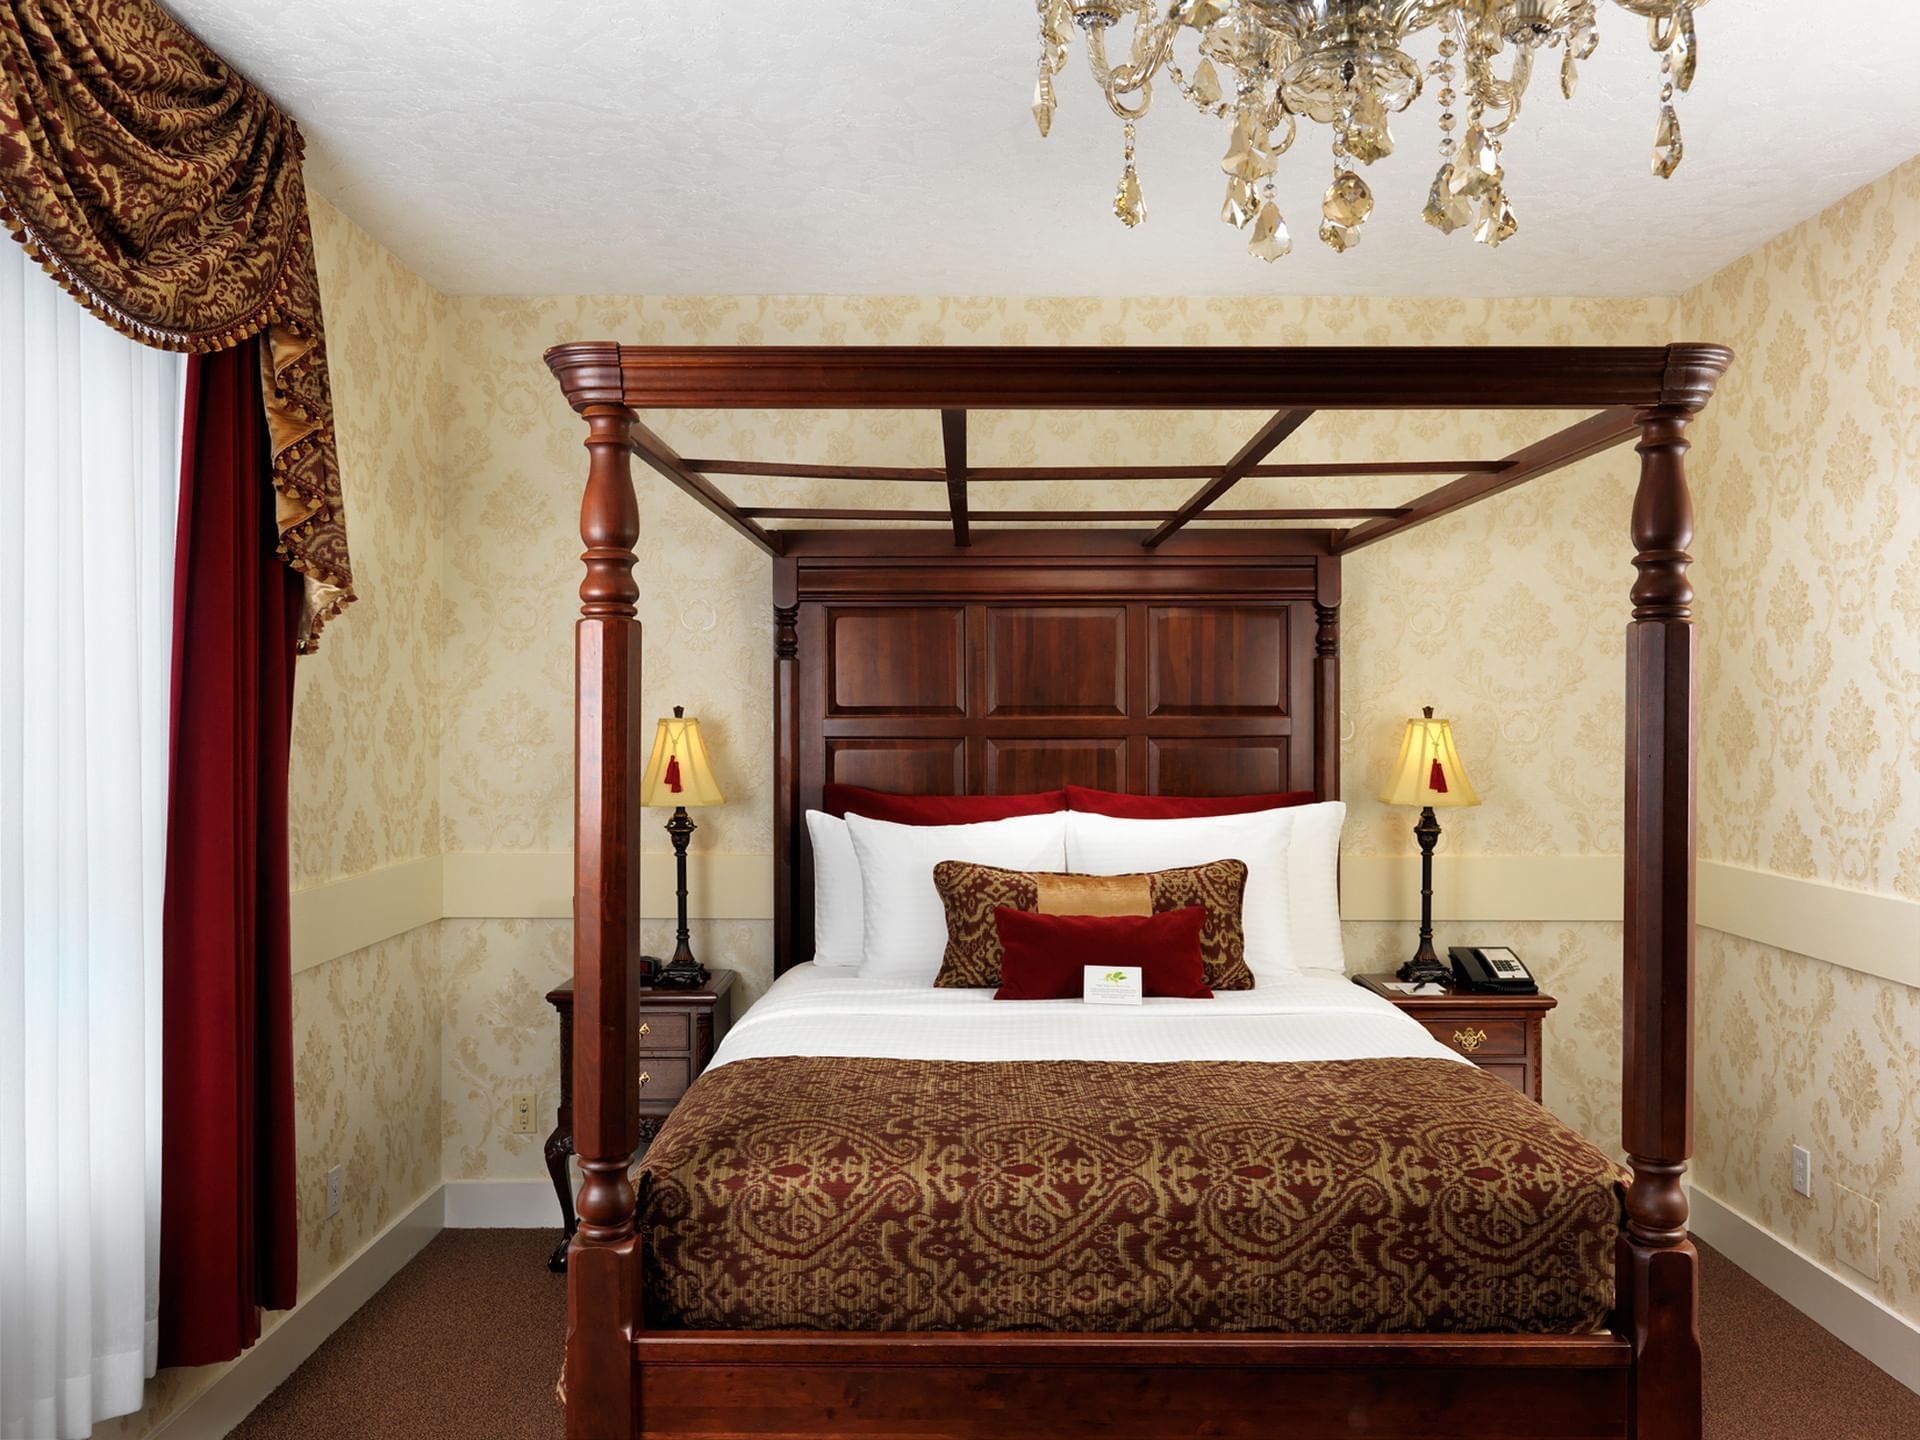 Four poster bed & wooden interior in Notre Dame Room at Pendray Inn & Tea House